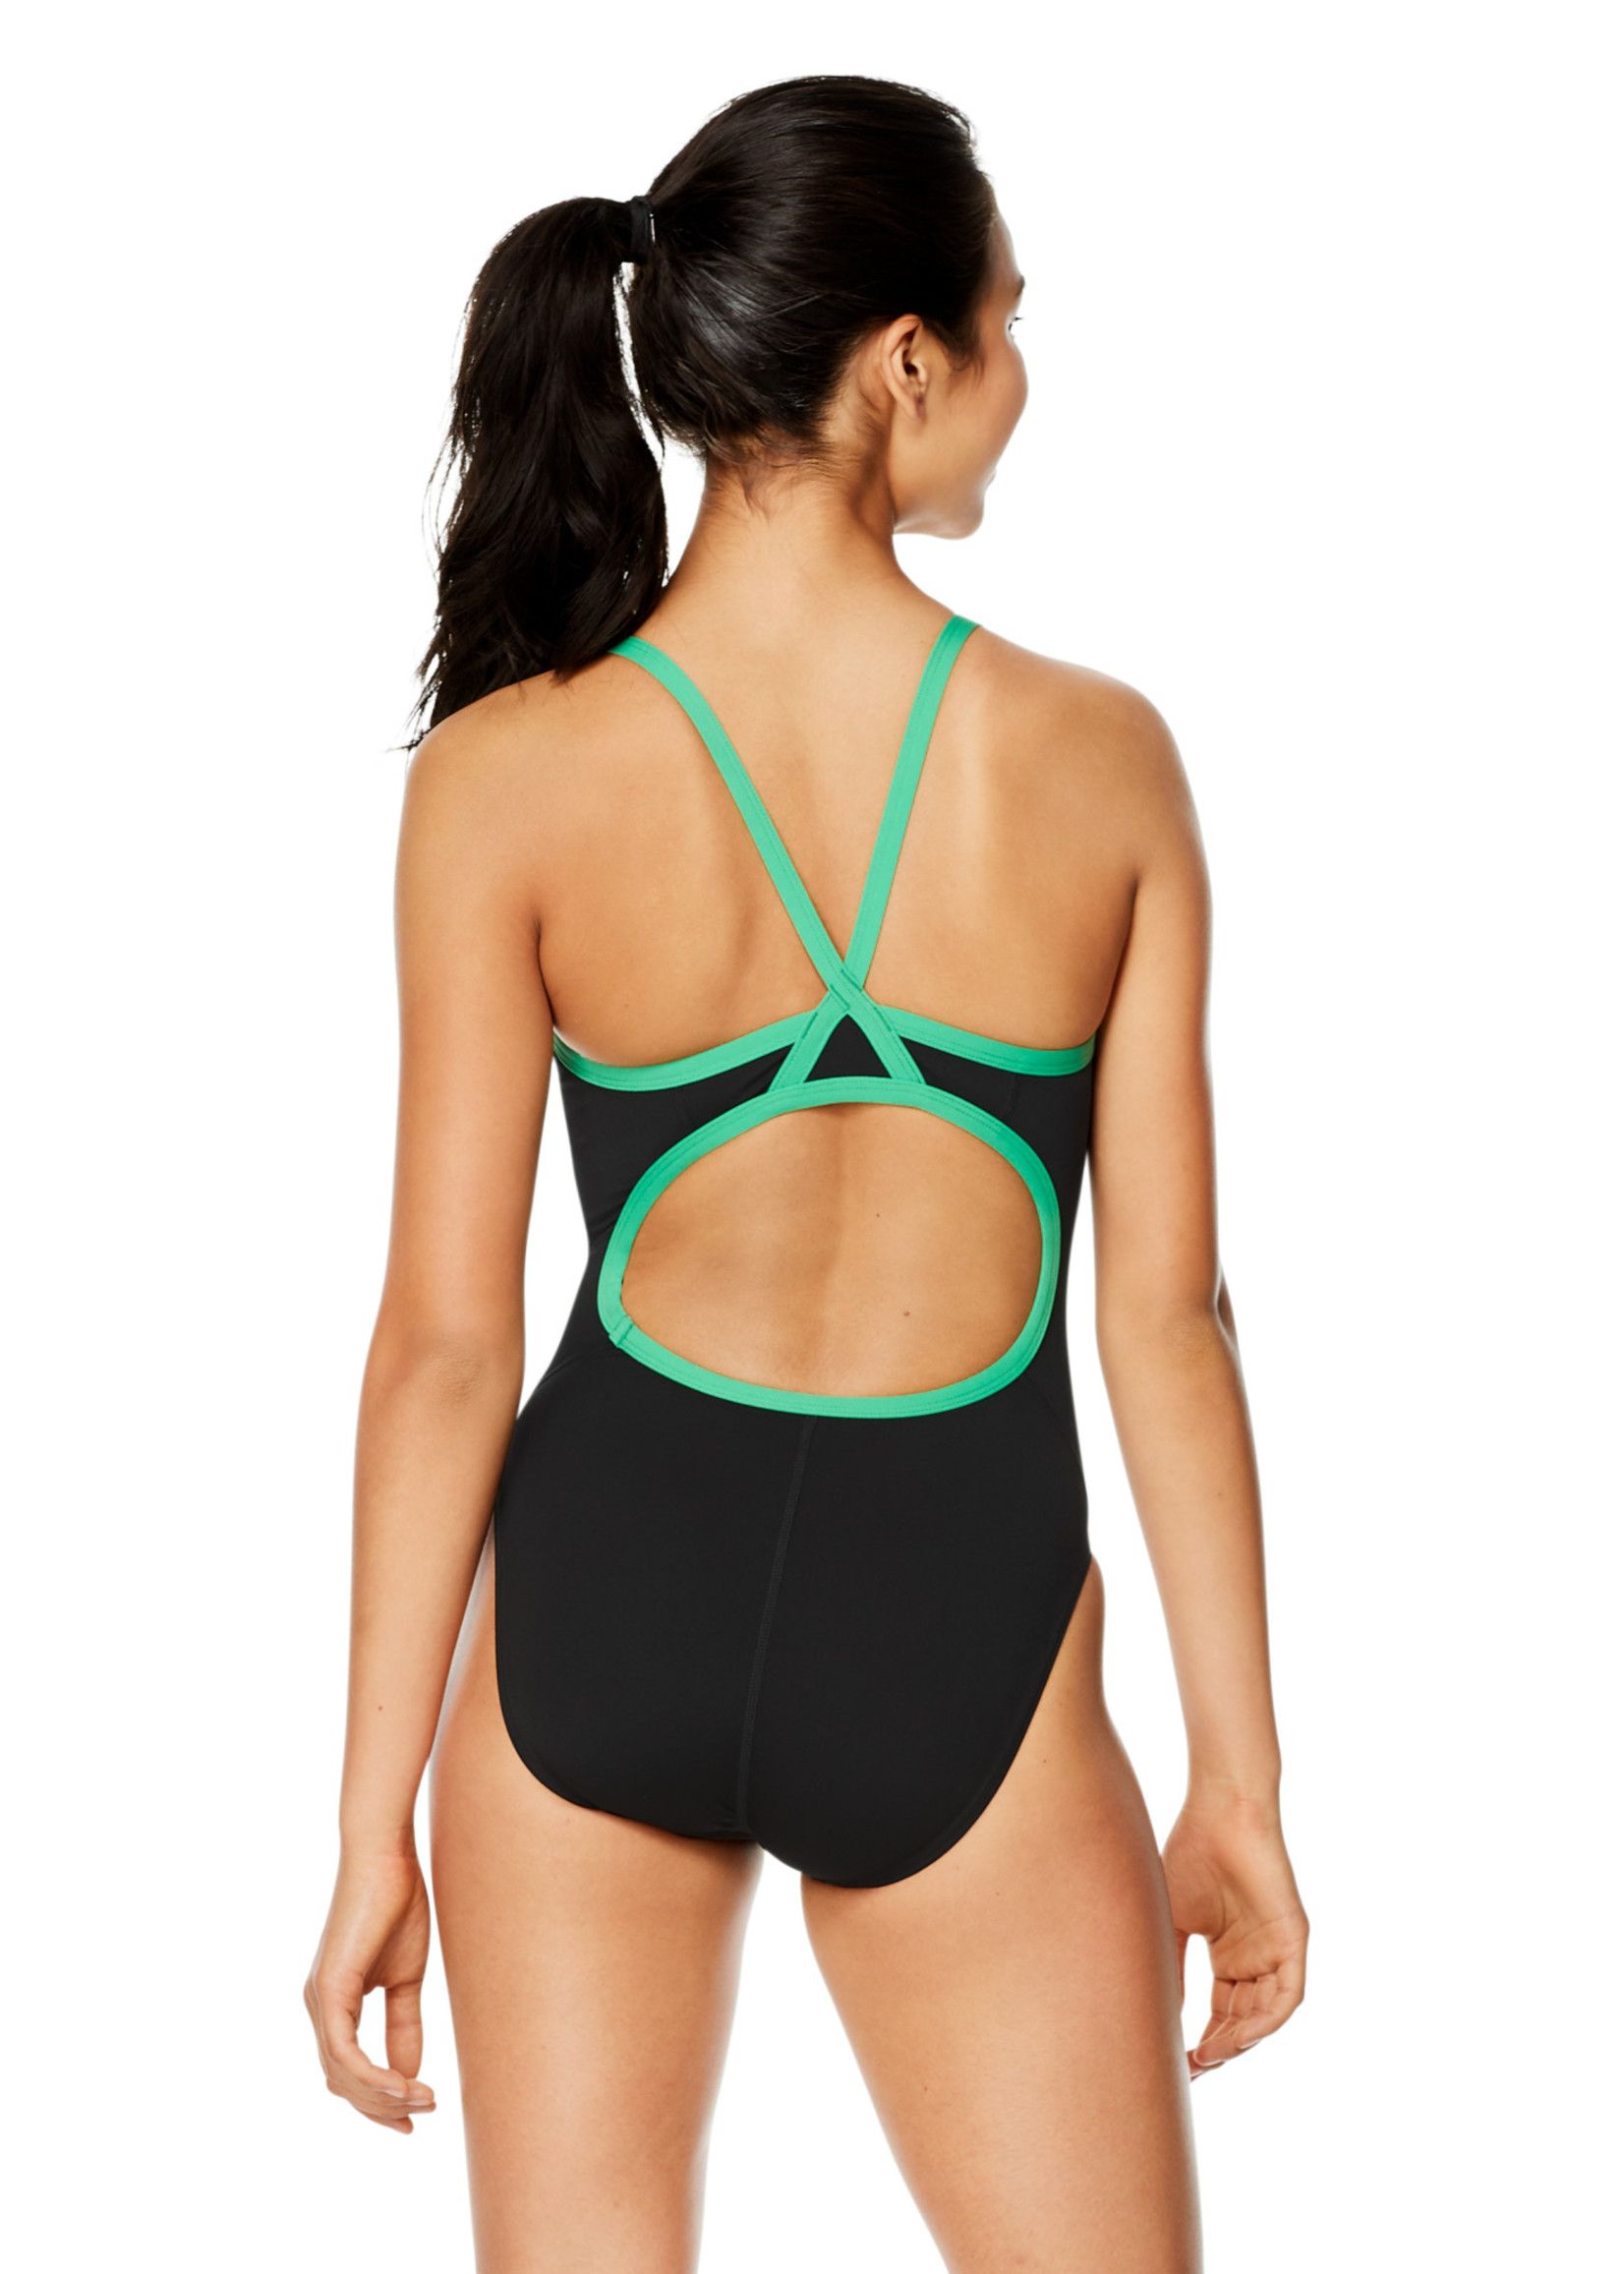 Flyback Training Suit 989 Black/Bright Green